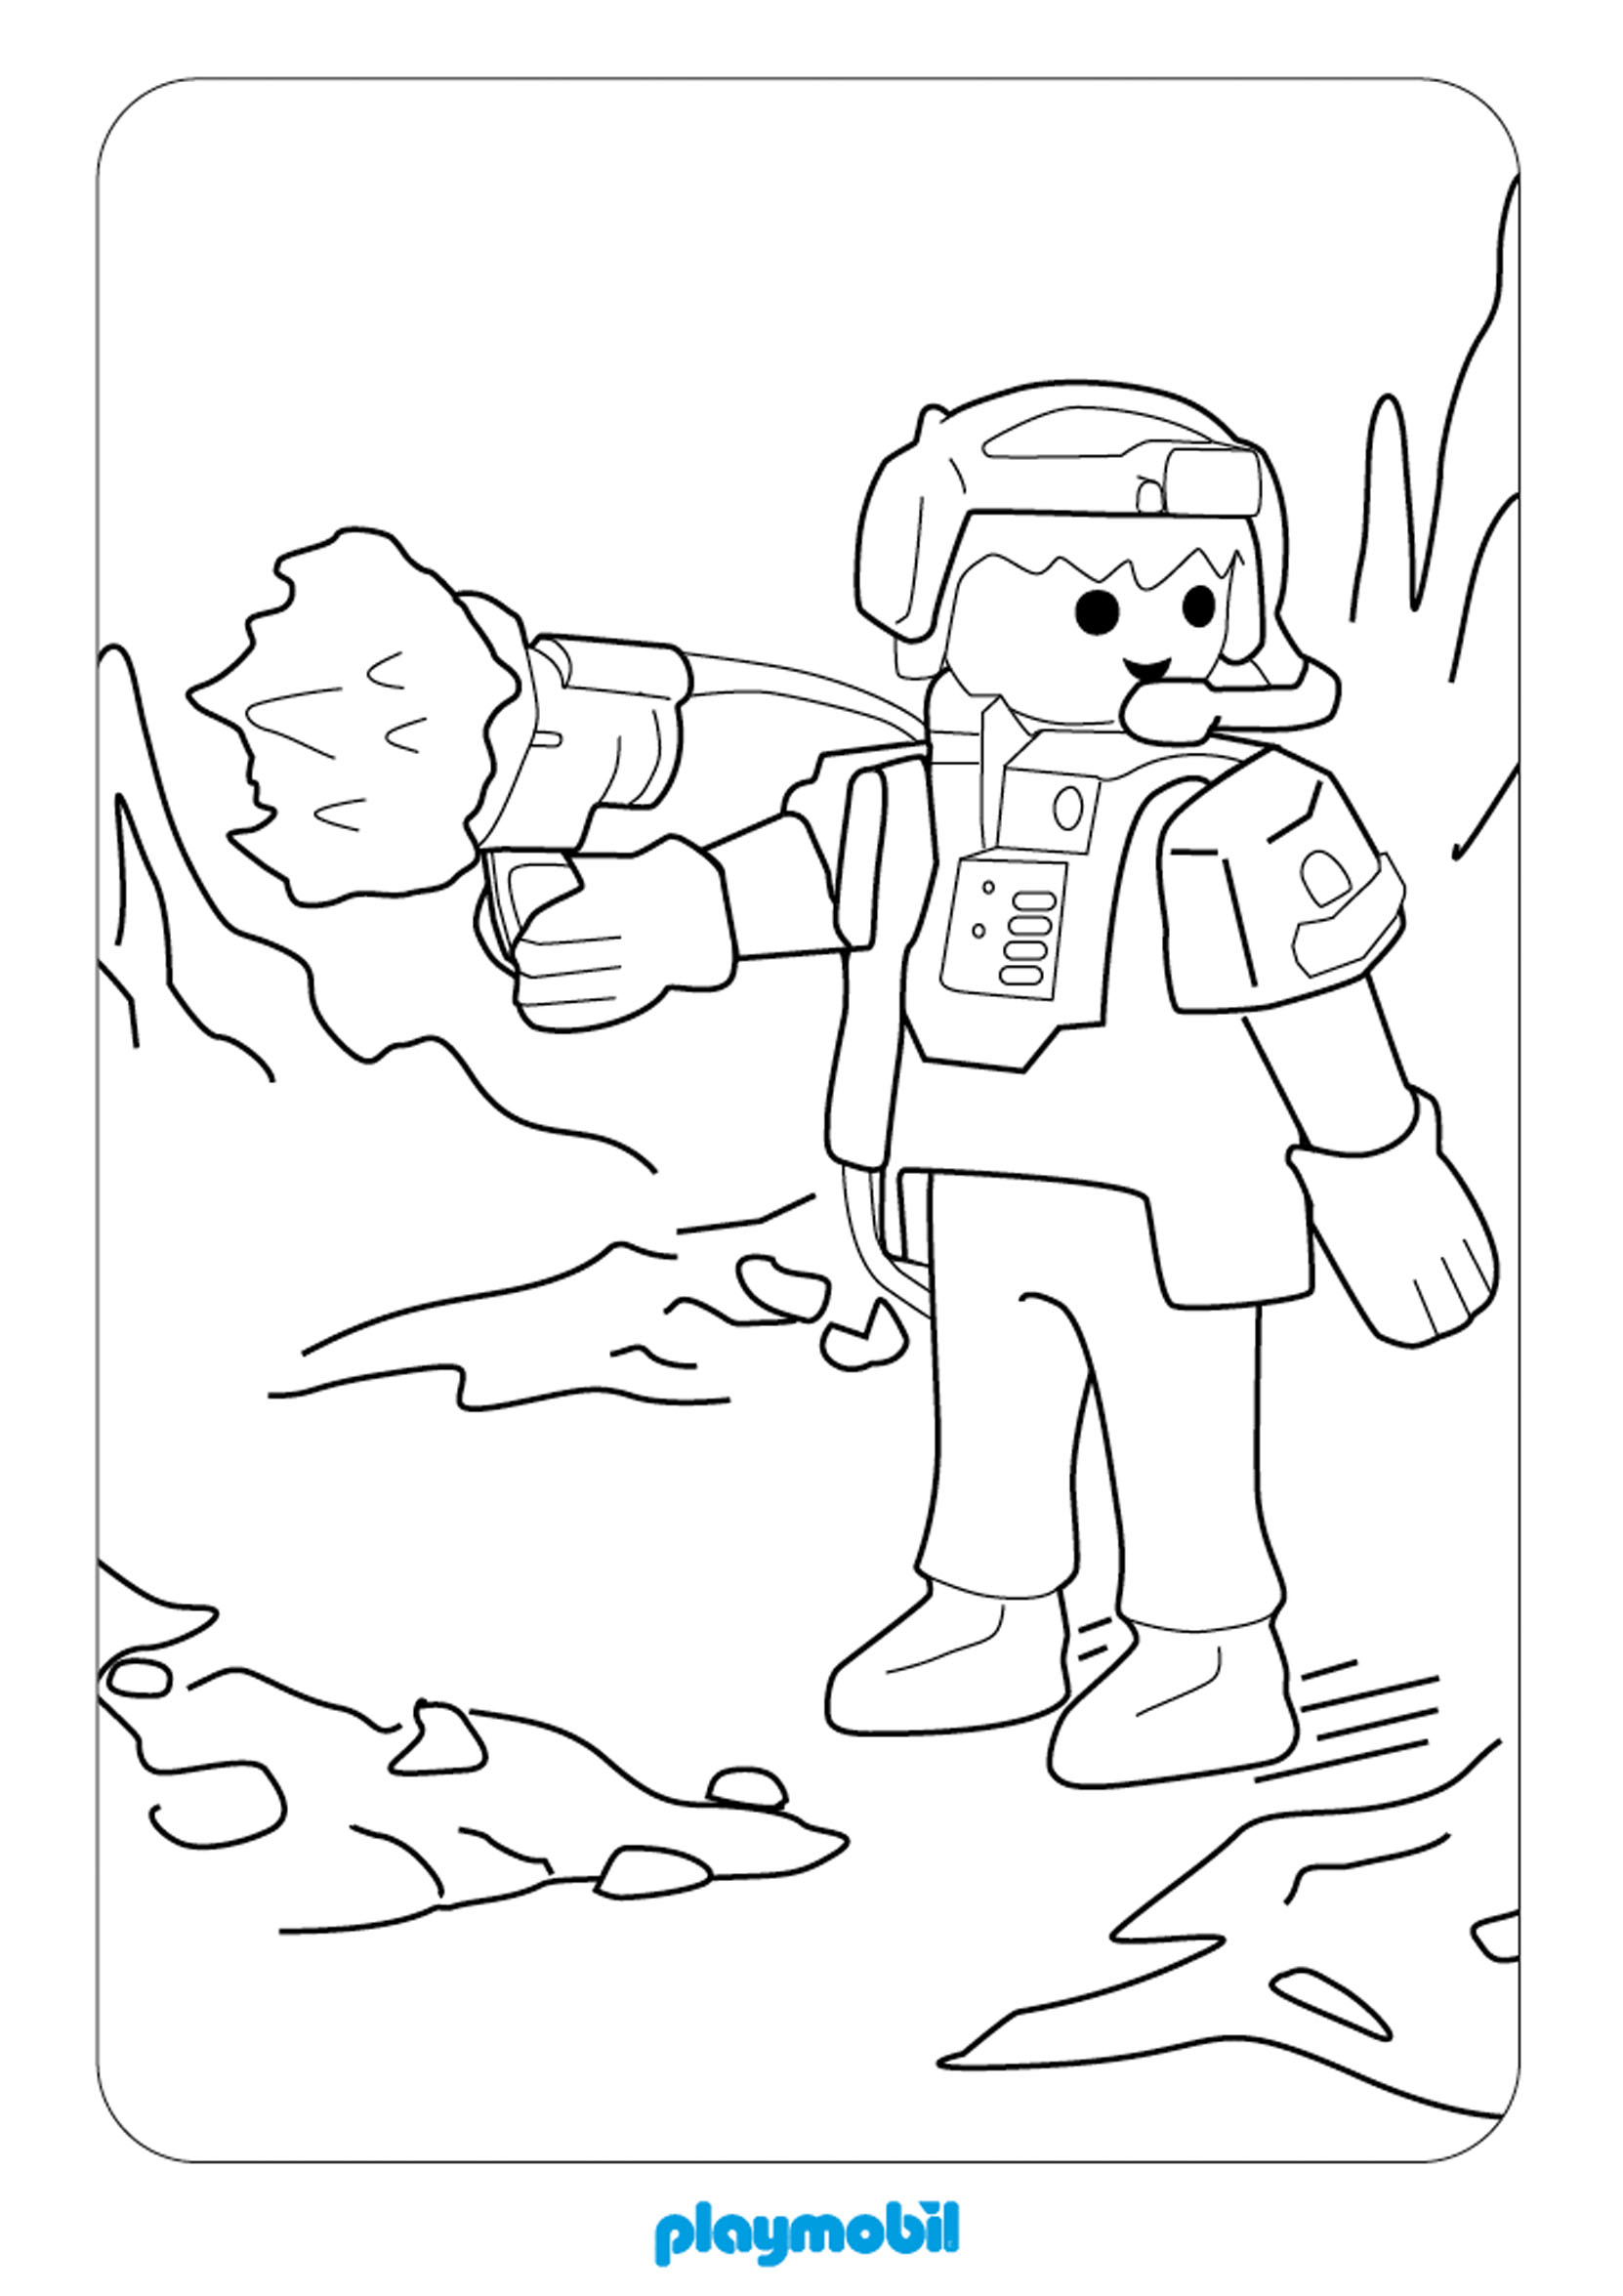 playmobil coloring pages  best coloring pages for kids